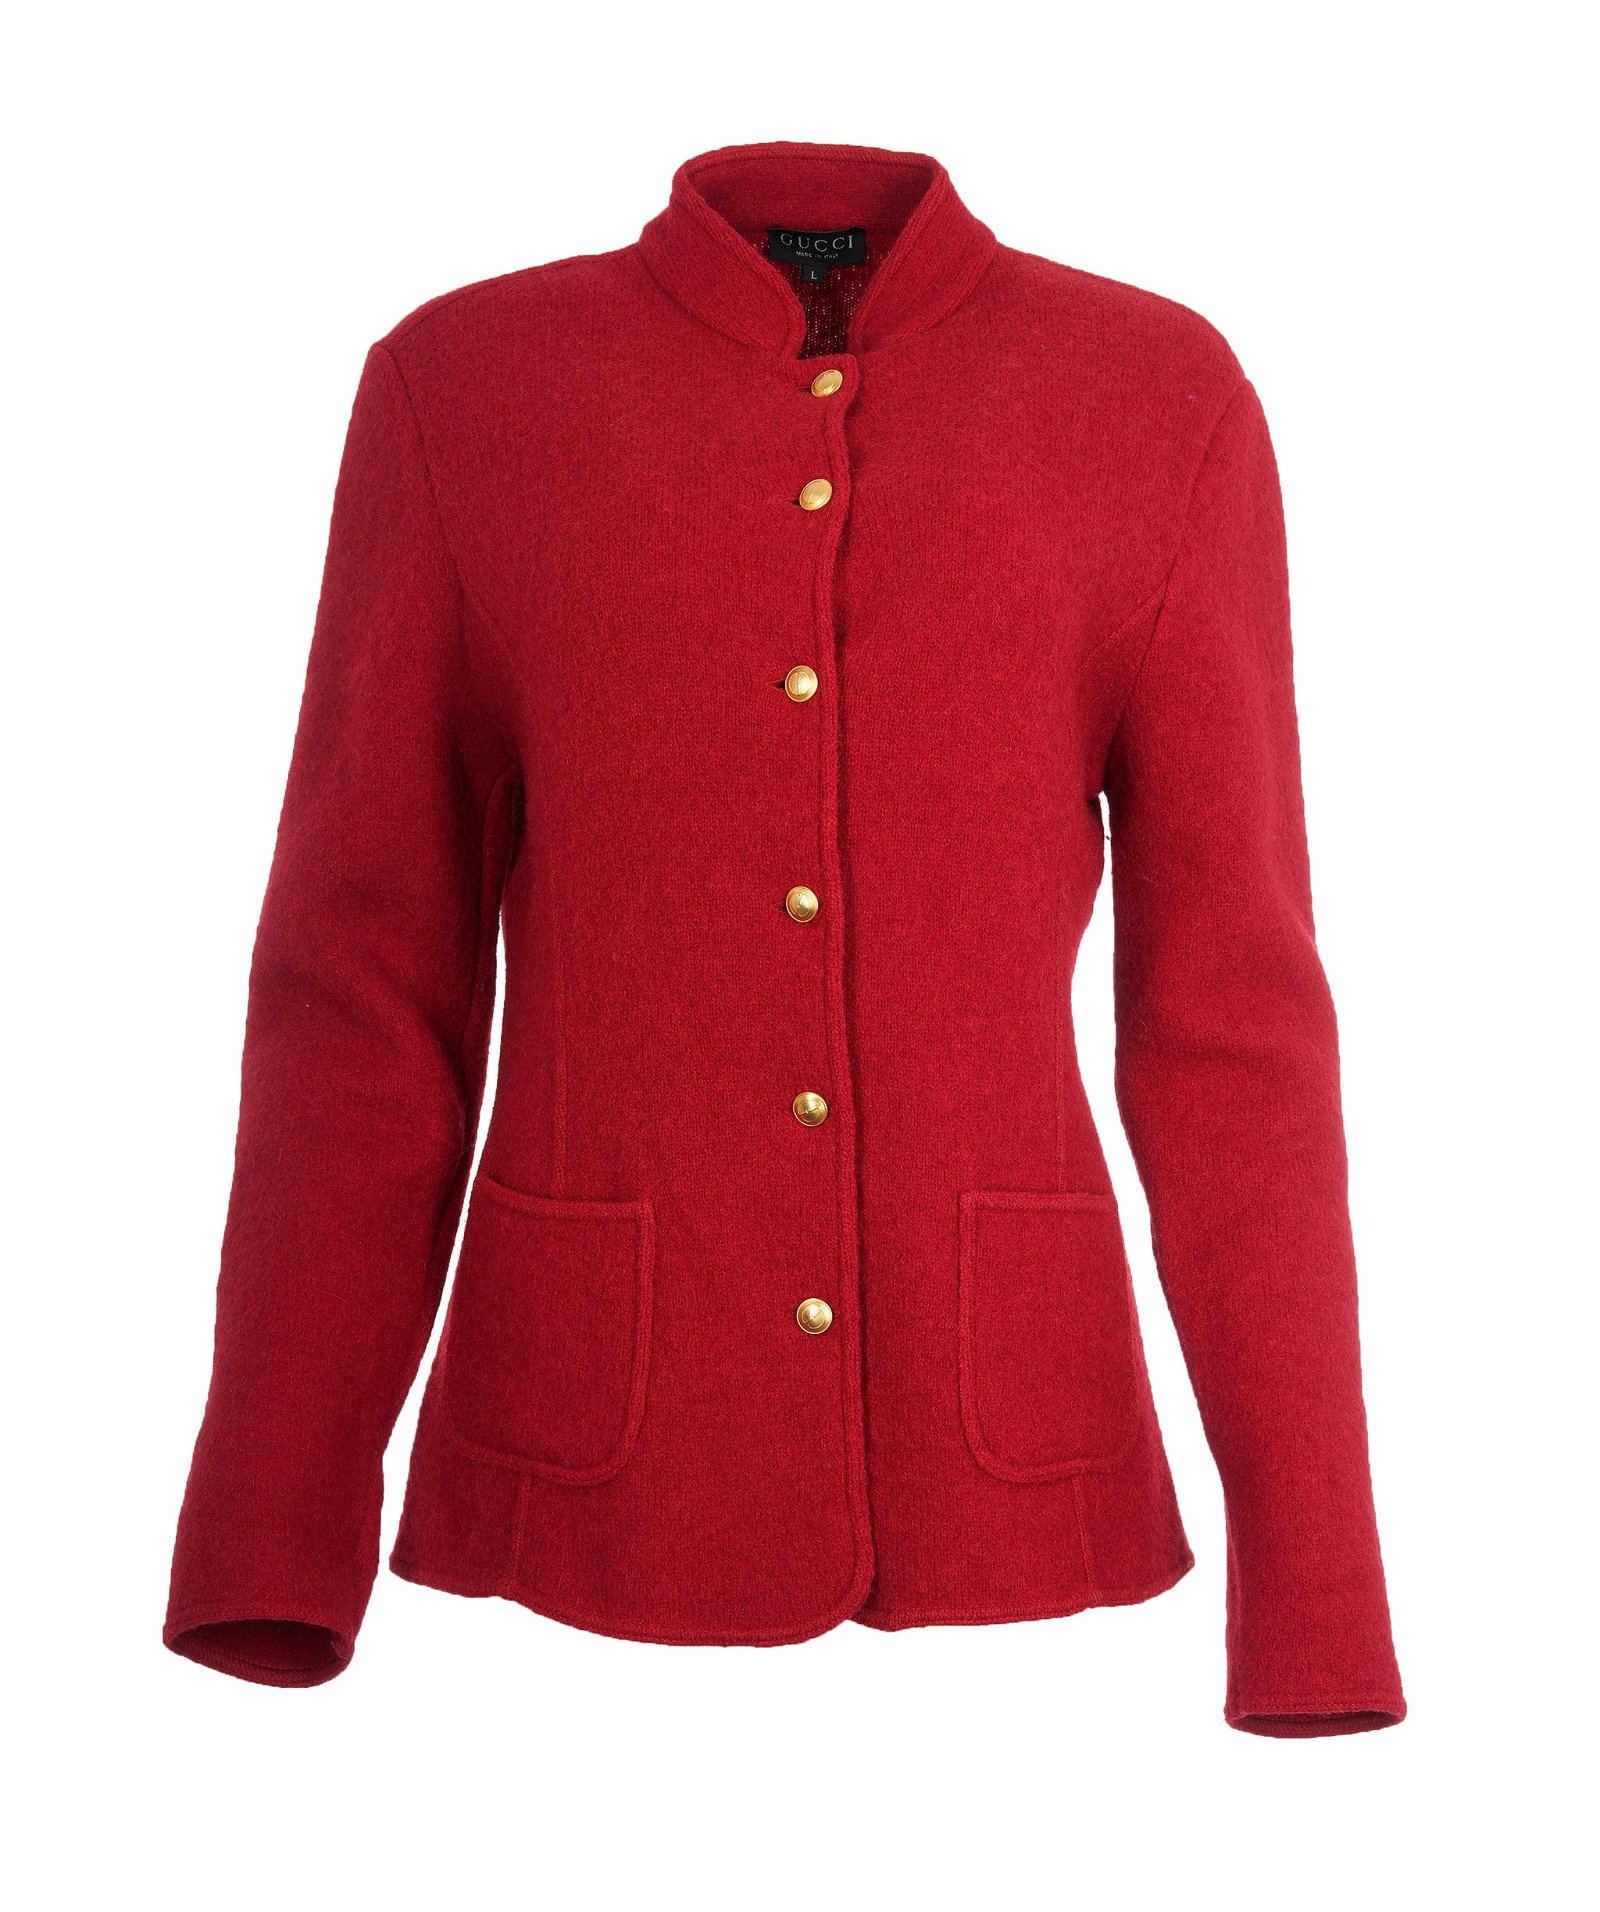 Image of Gucci red wool coat with gold buttons - AJC0470